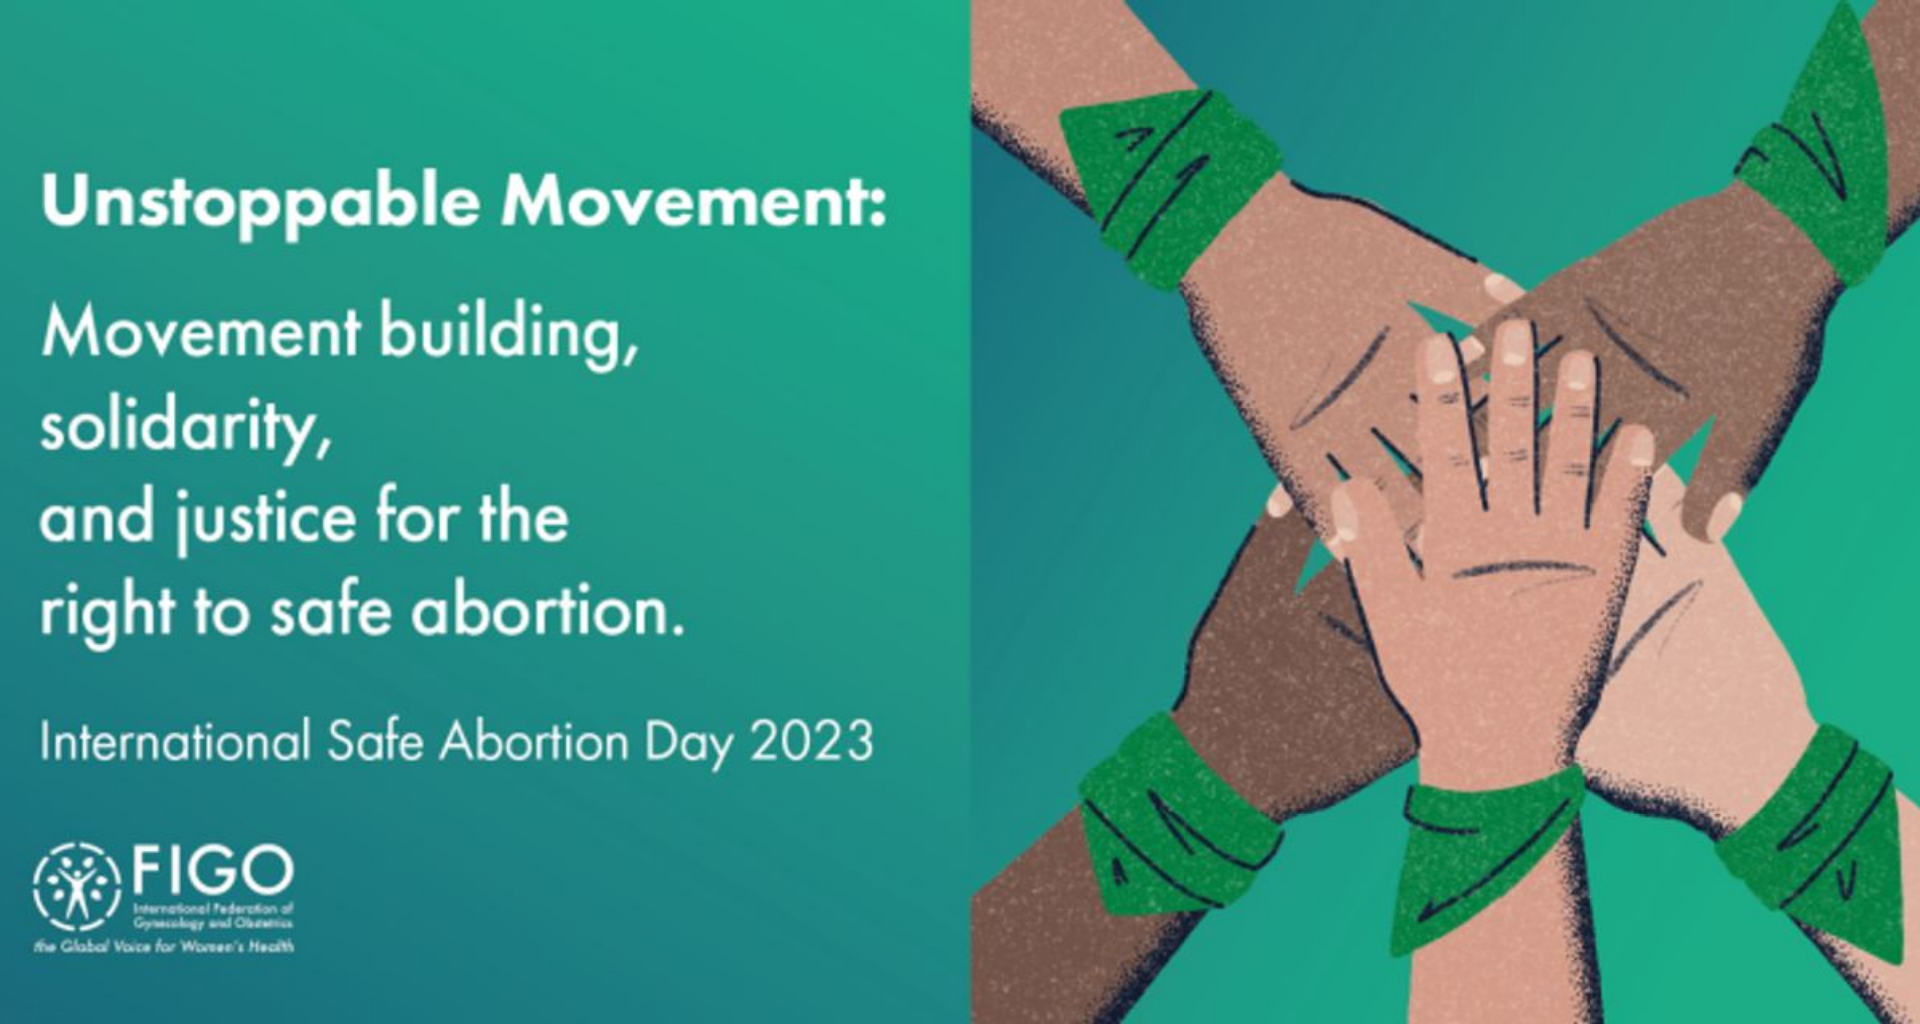 International Safe Abortion Day 2023: OBGYNS are essential allies for the unstoppable abortion solidarity movement